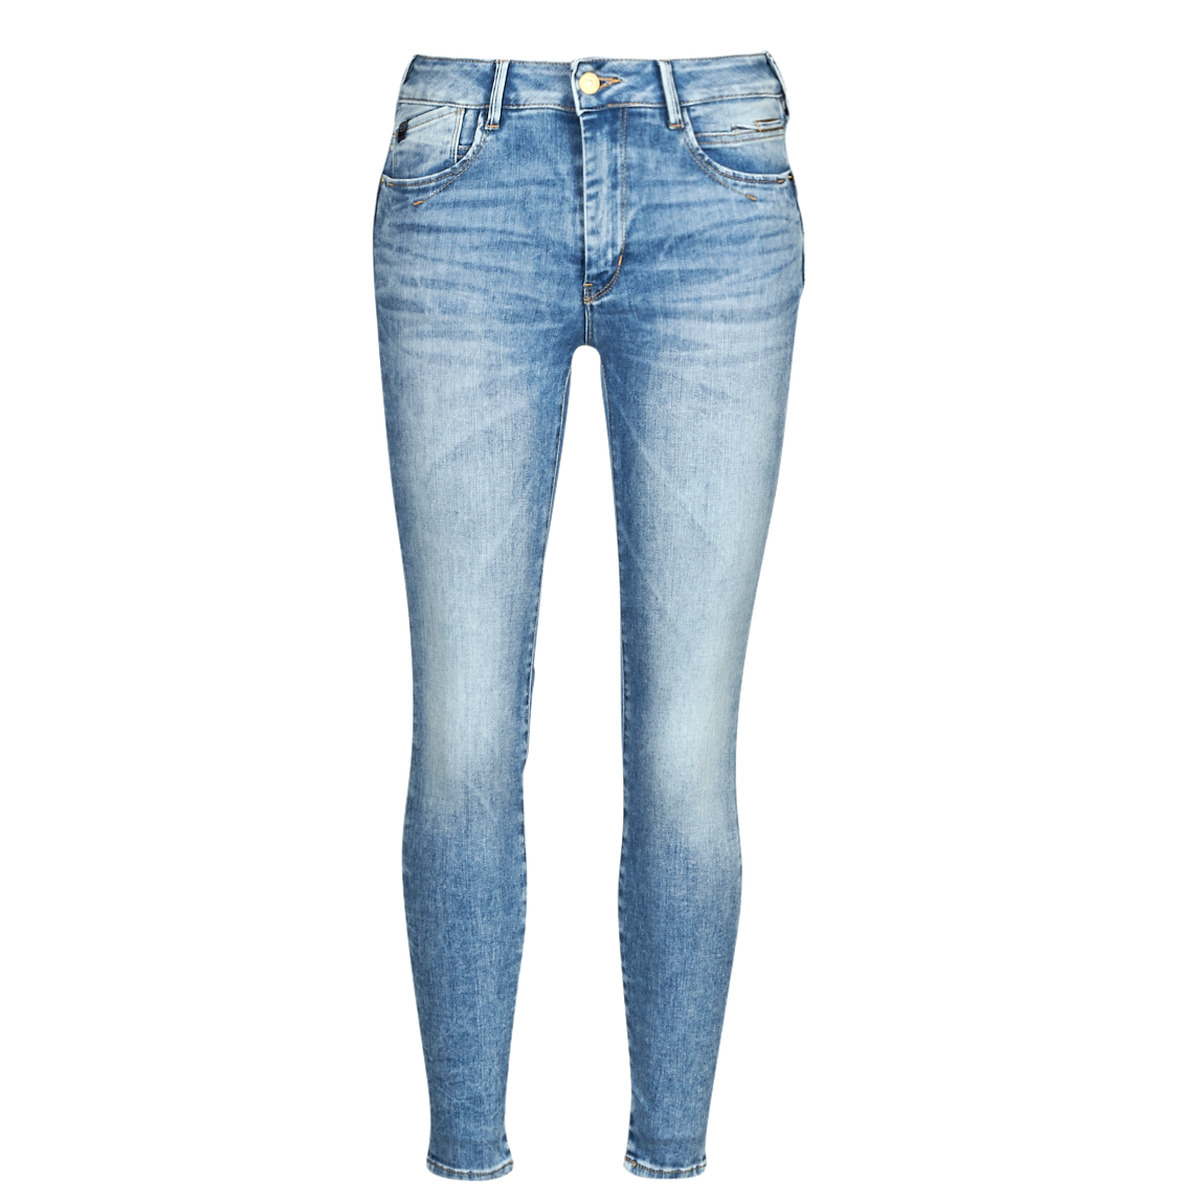 Spartoo Woman Skinny Jeans in Blue from Le Temps des Cerises GOOFASH